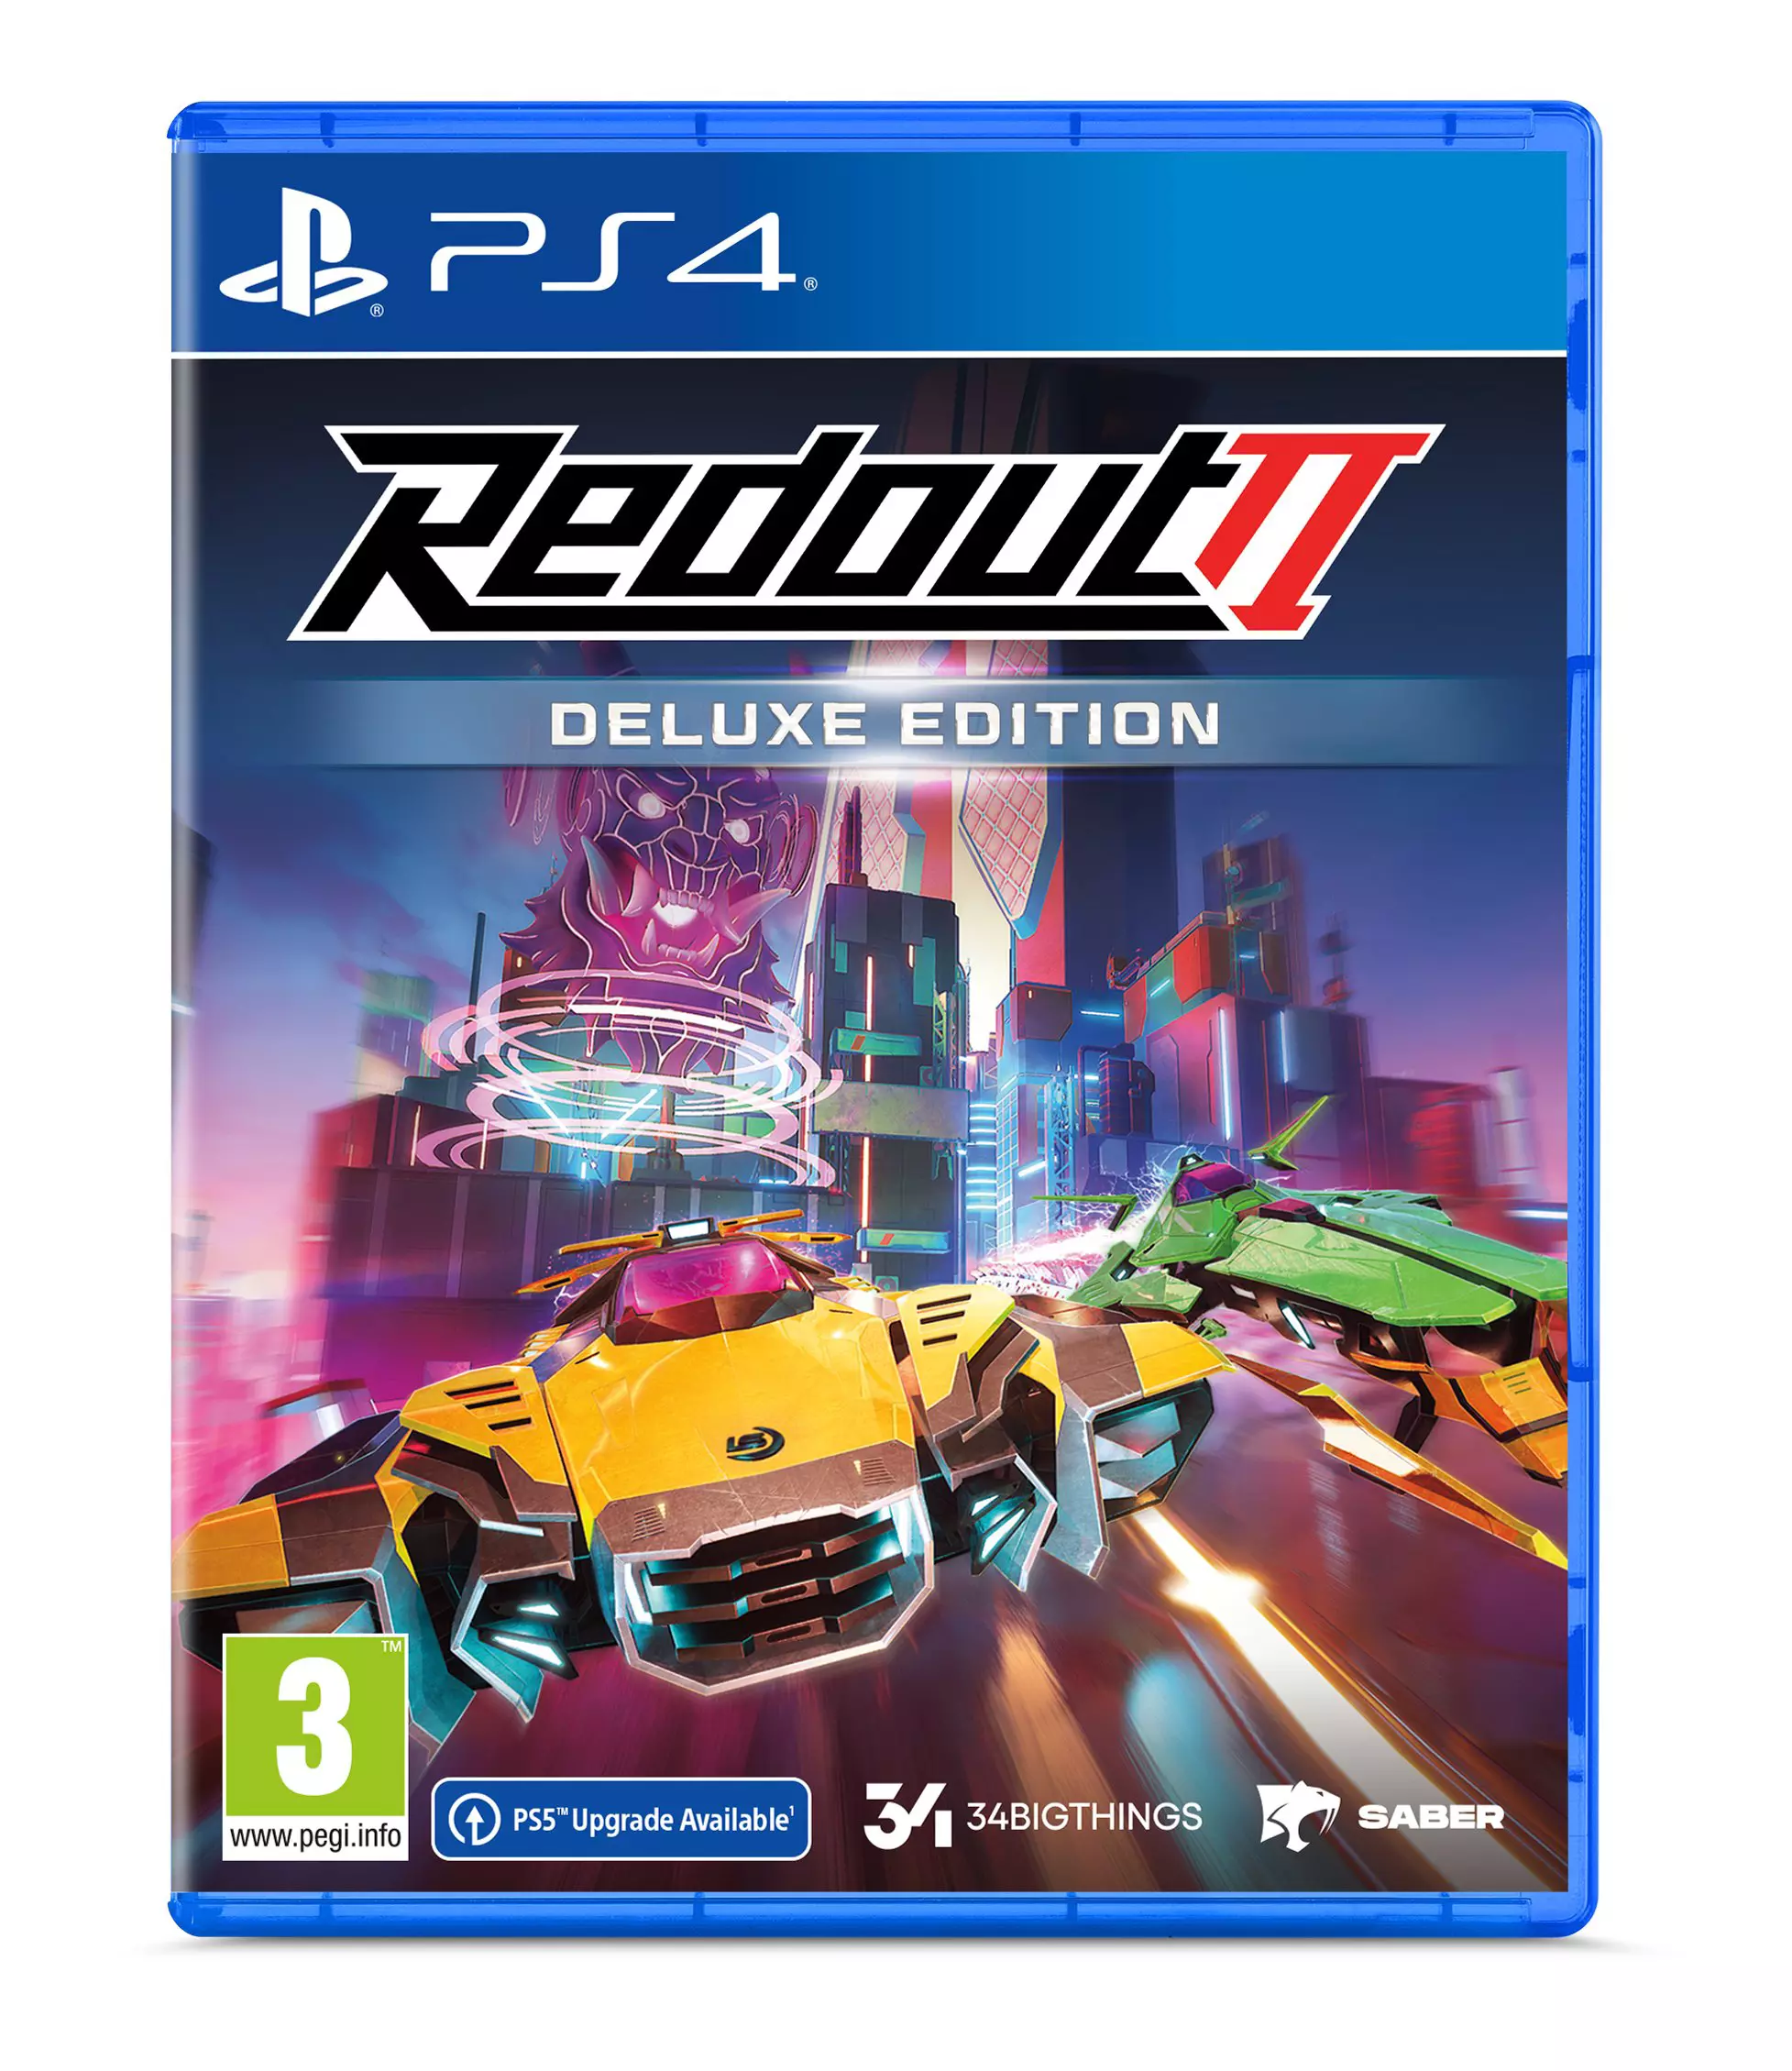 Redout Deluxe Edition